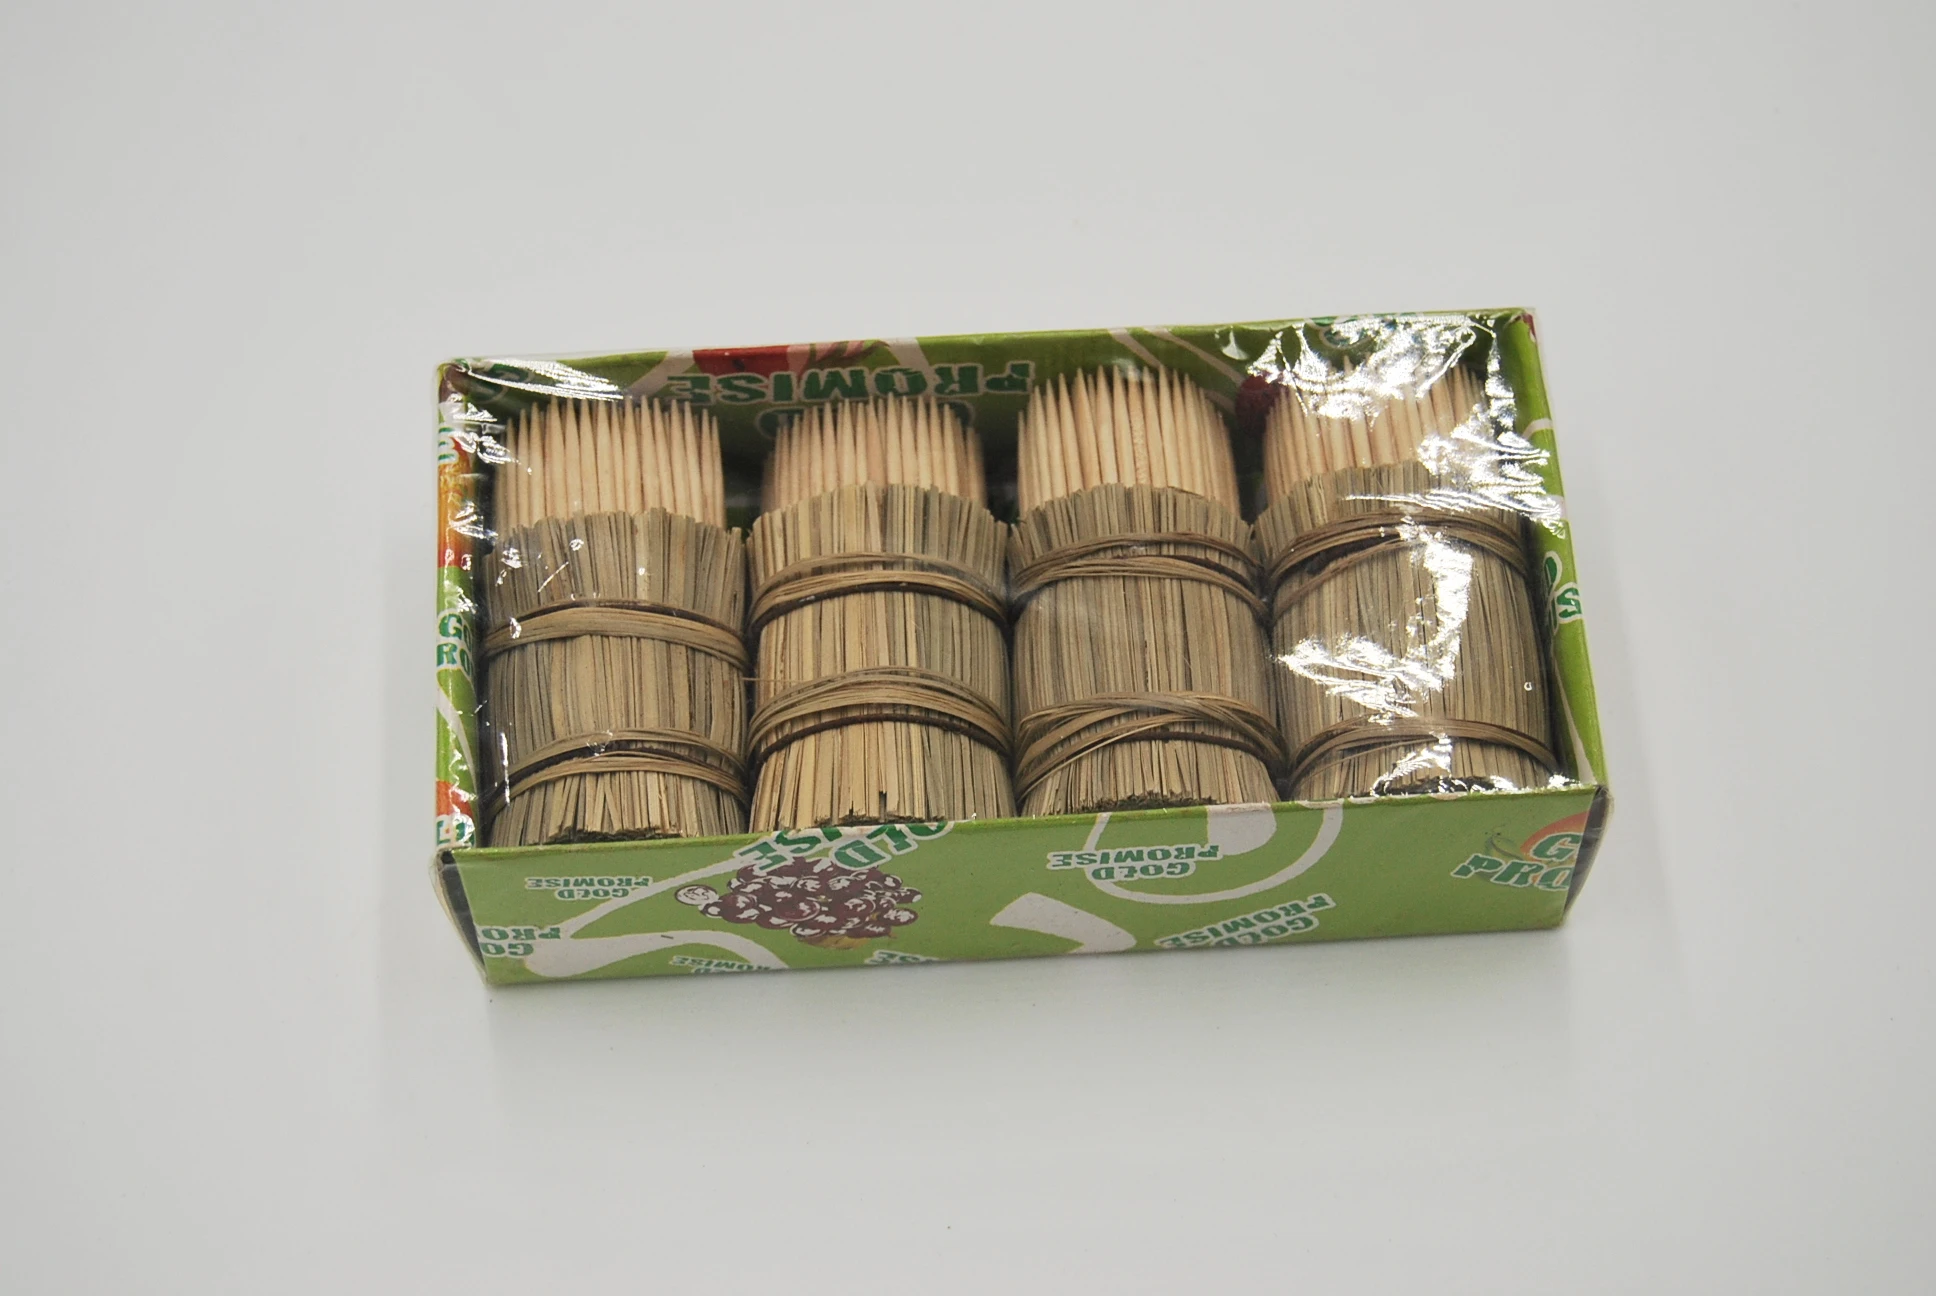 The most favorable price of safe and reliable wooden grass toothpick